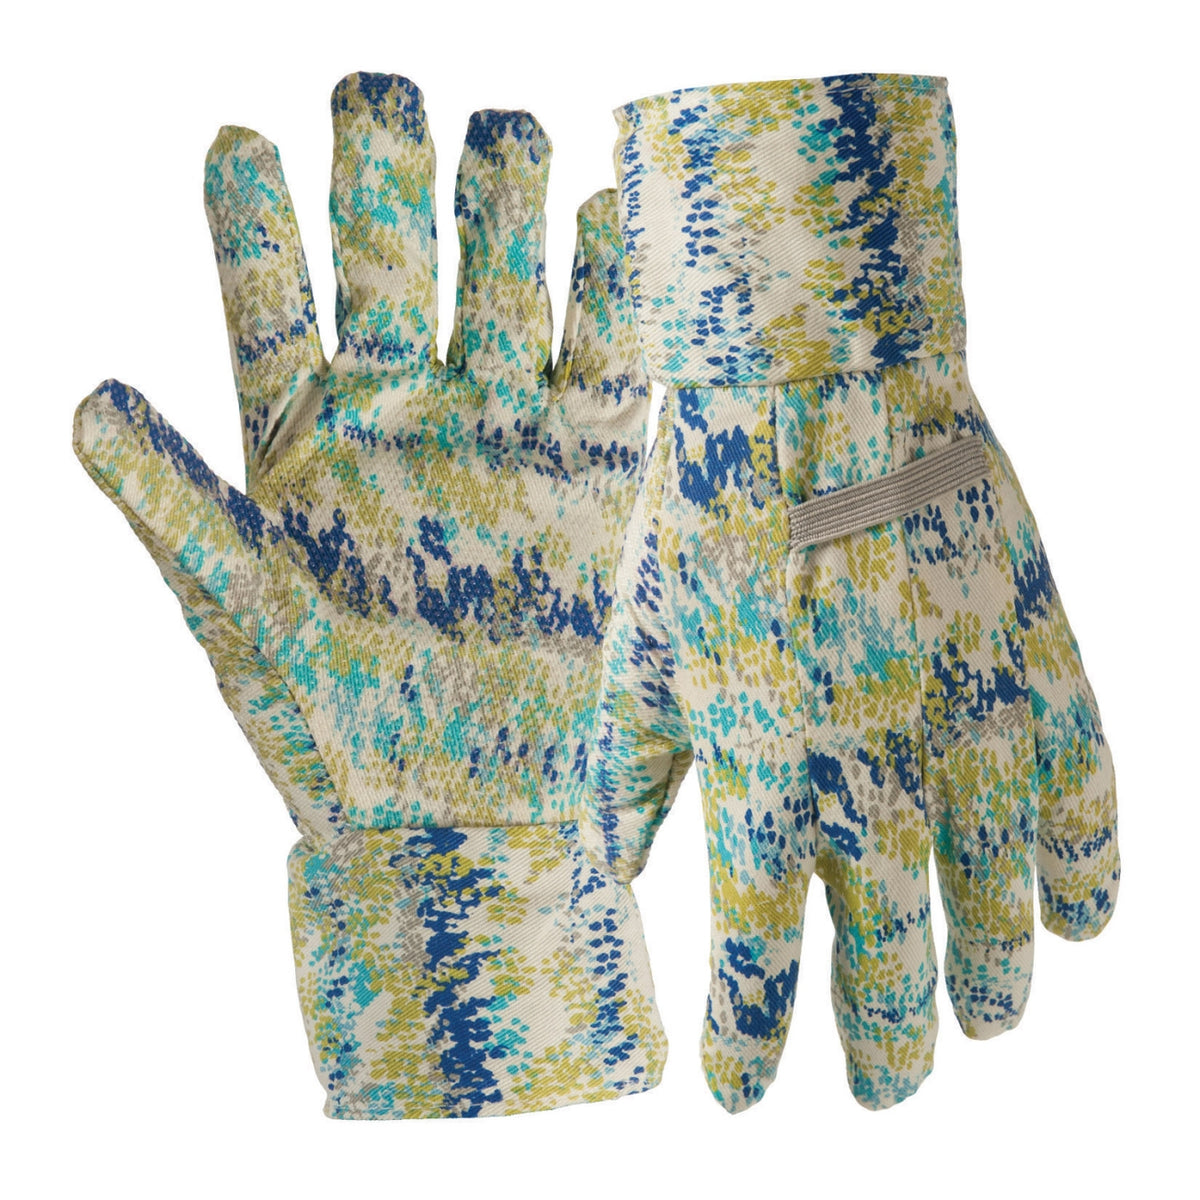 buy garden gloves at cheap rate in bulk. wholesale & retail lawn & plant watering tools store.